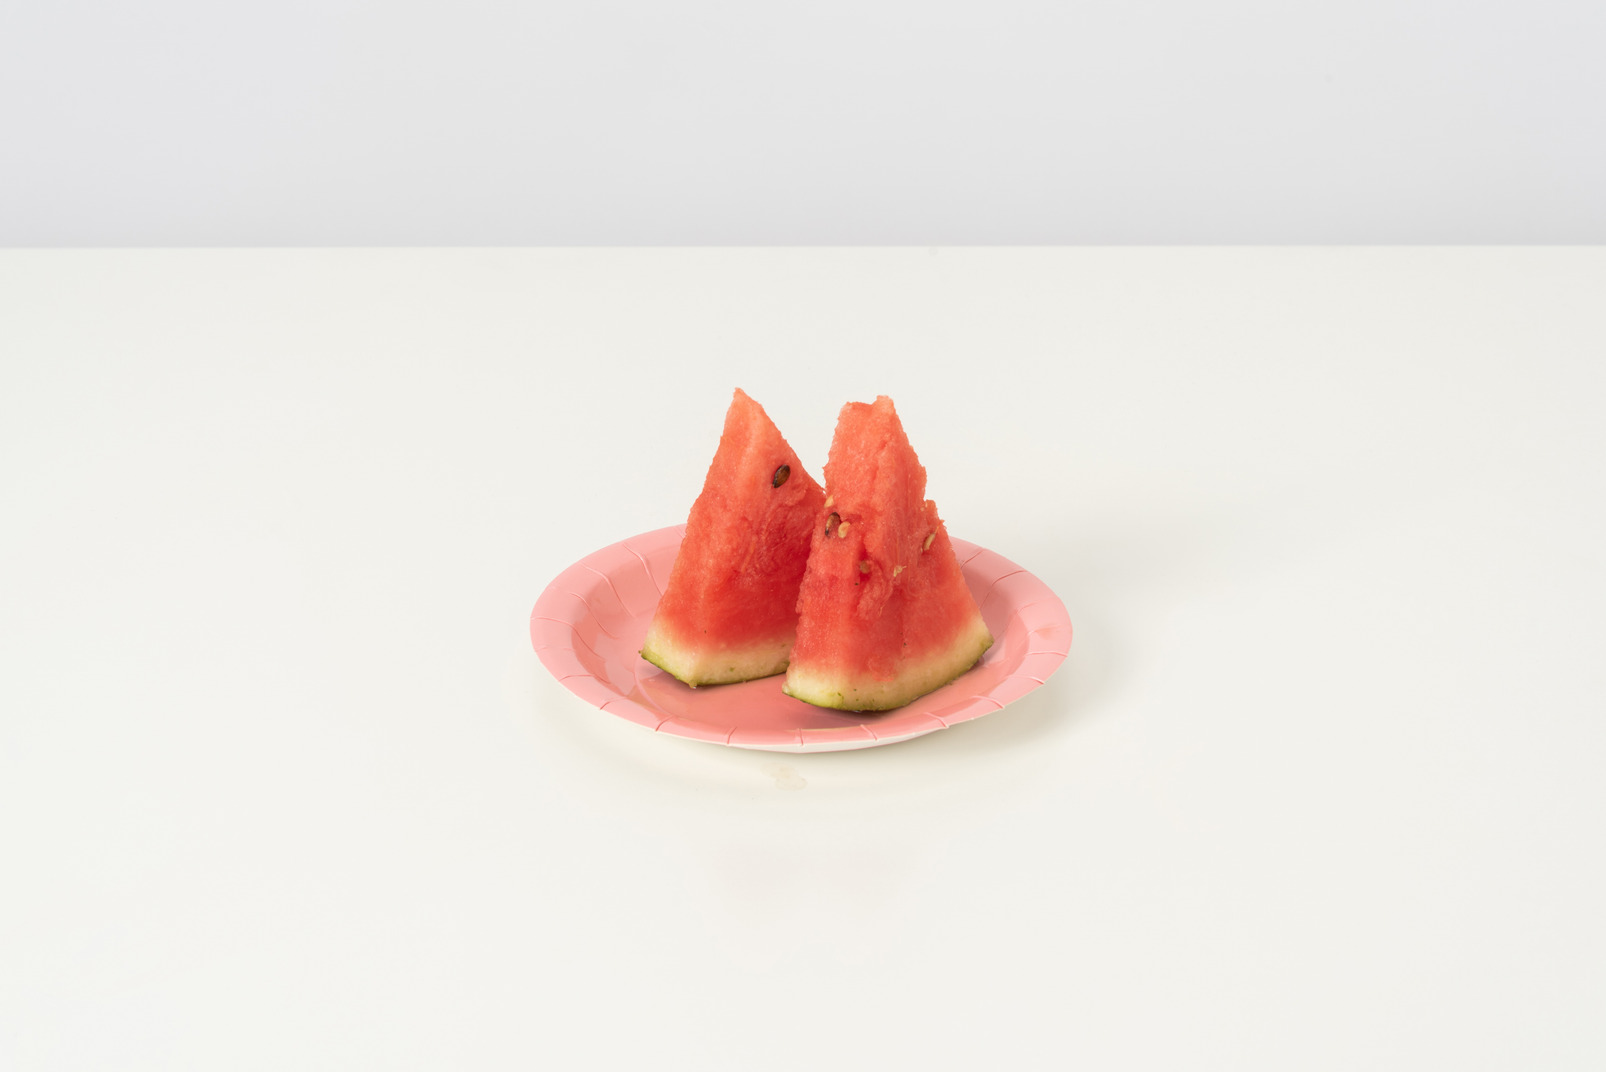 Two slices of a sweet ripe watermelon, lying isolated against a white background on a cute pink plate